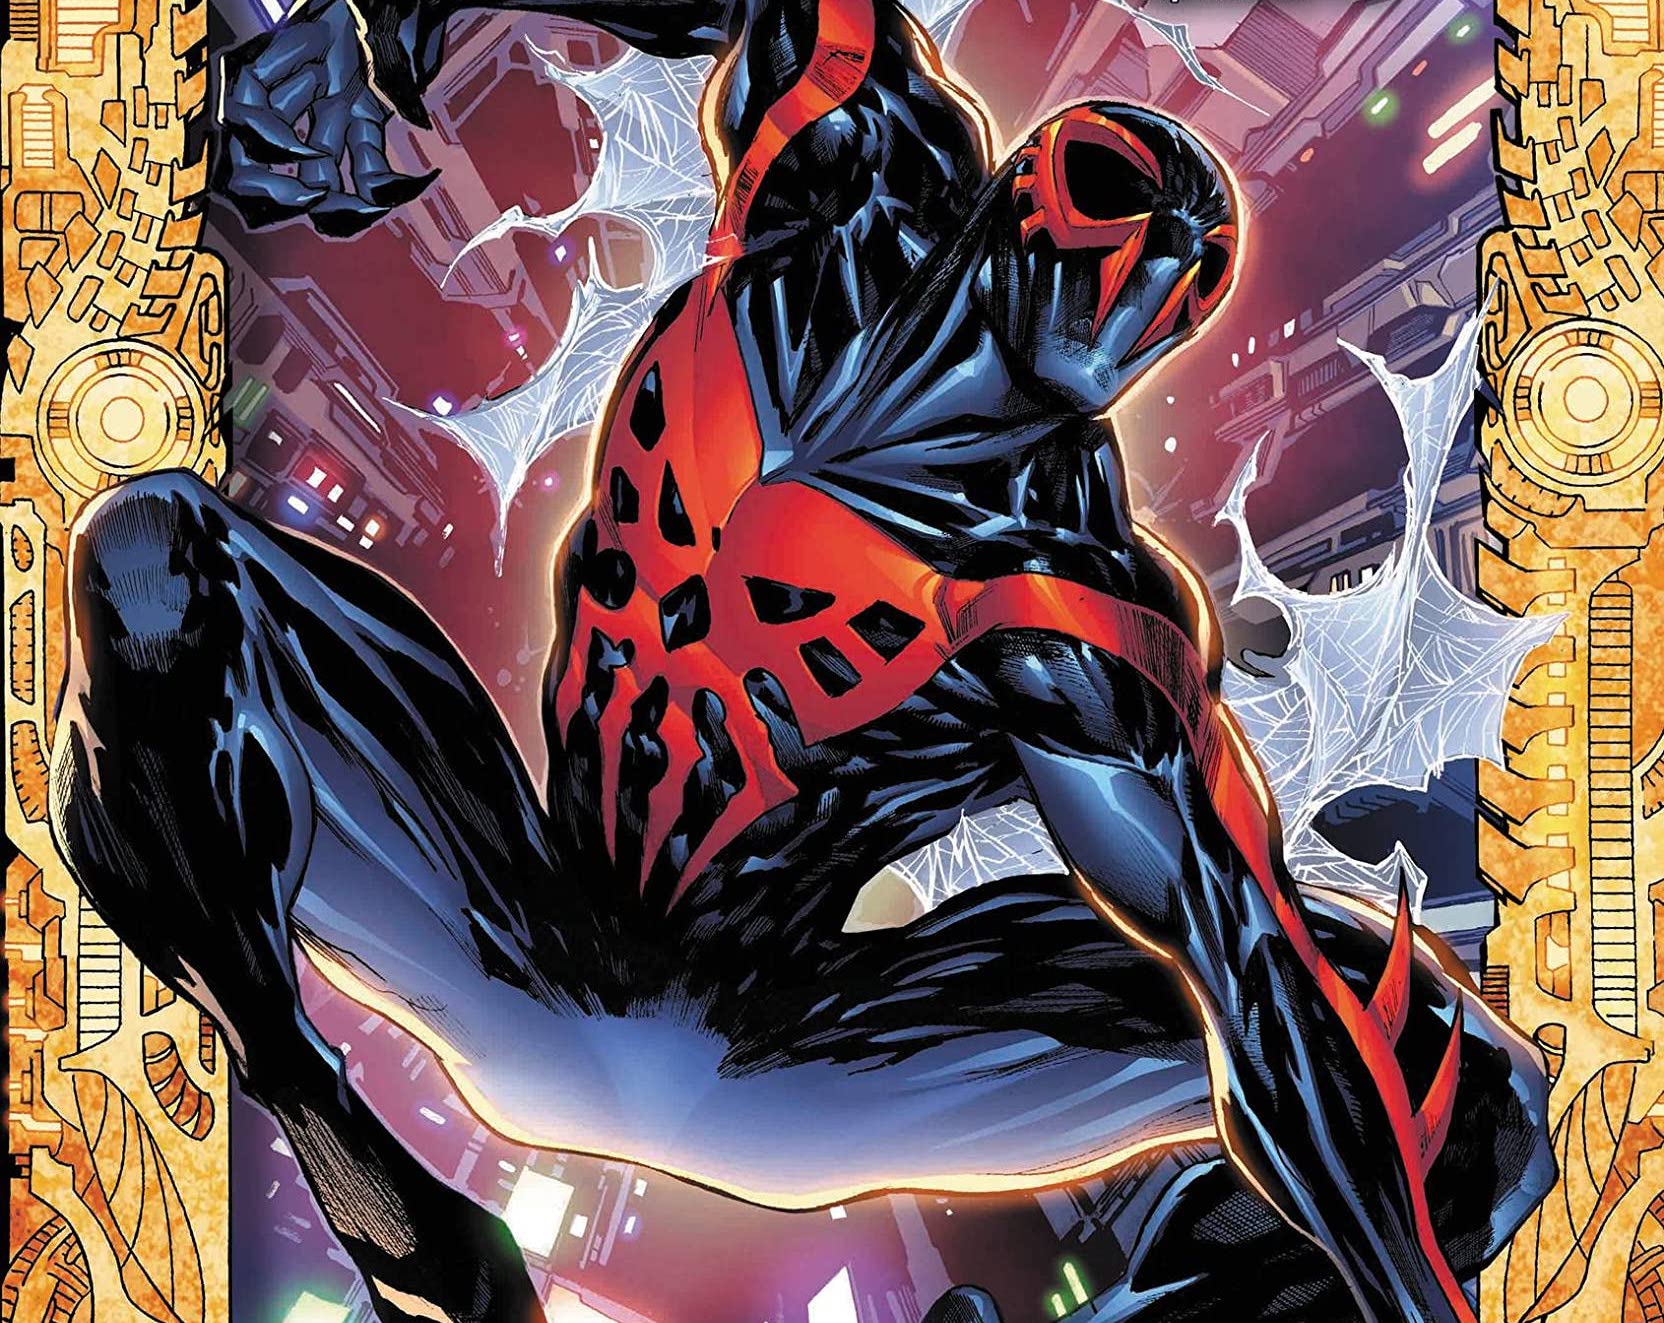 'Spider-Man 2099: Exodus' TPB is an exciting, if somewhat inconsistent, collection